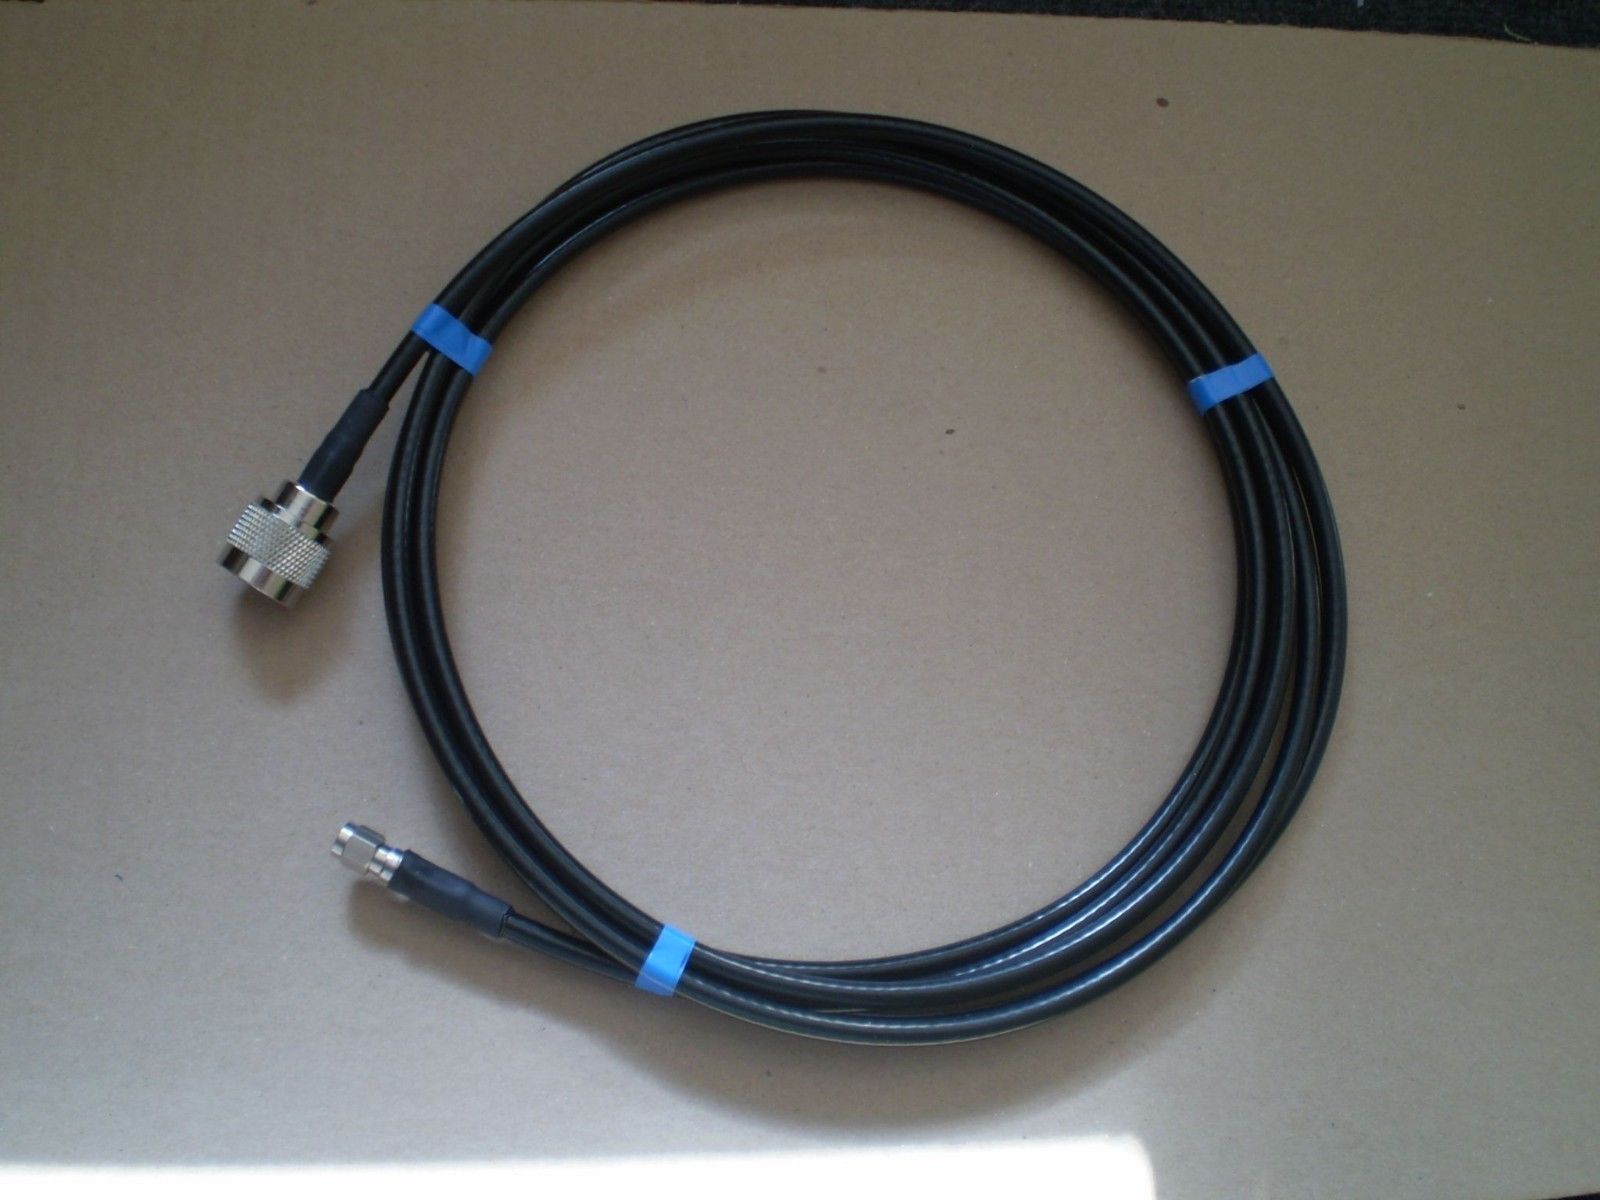 H155 BELDEN LOW LOSS CABLE N MALE TO RP SMA MALE VARIOUS LENGHTS 0.5M-5M